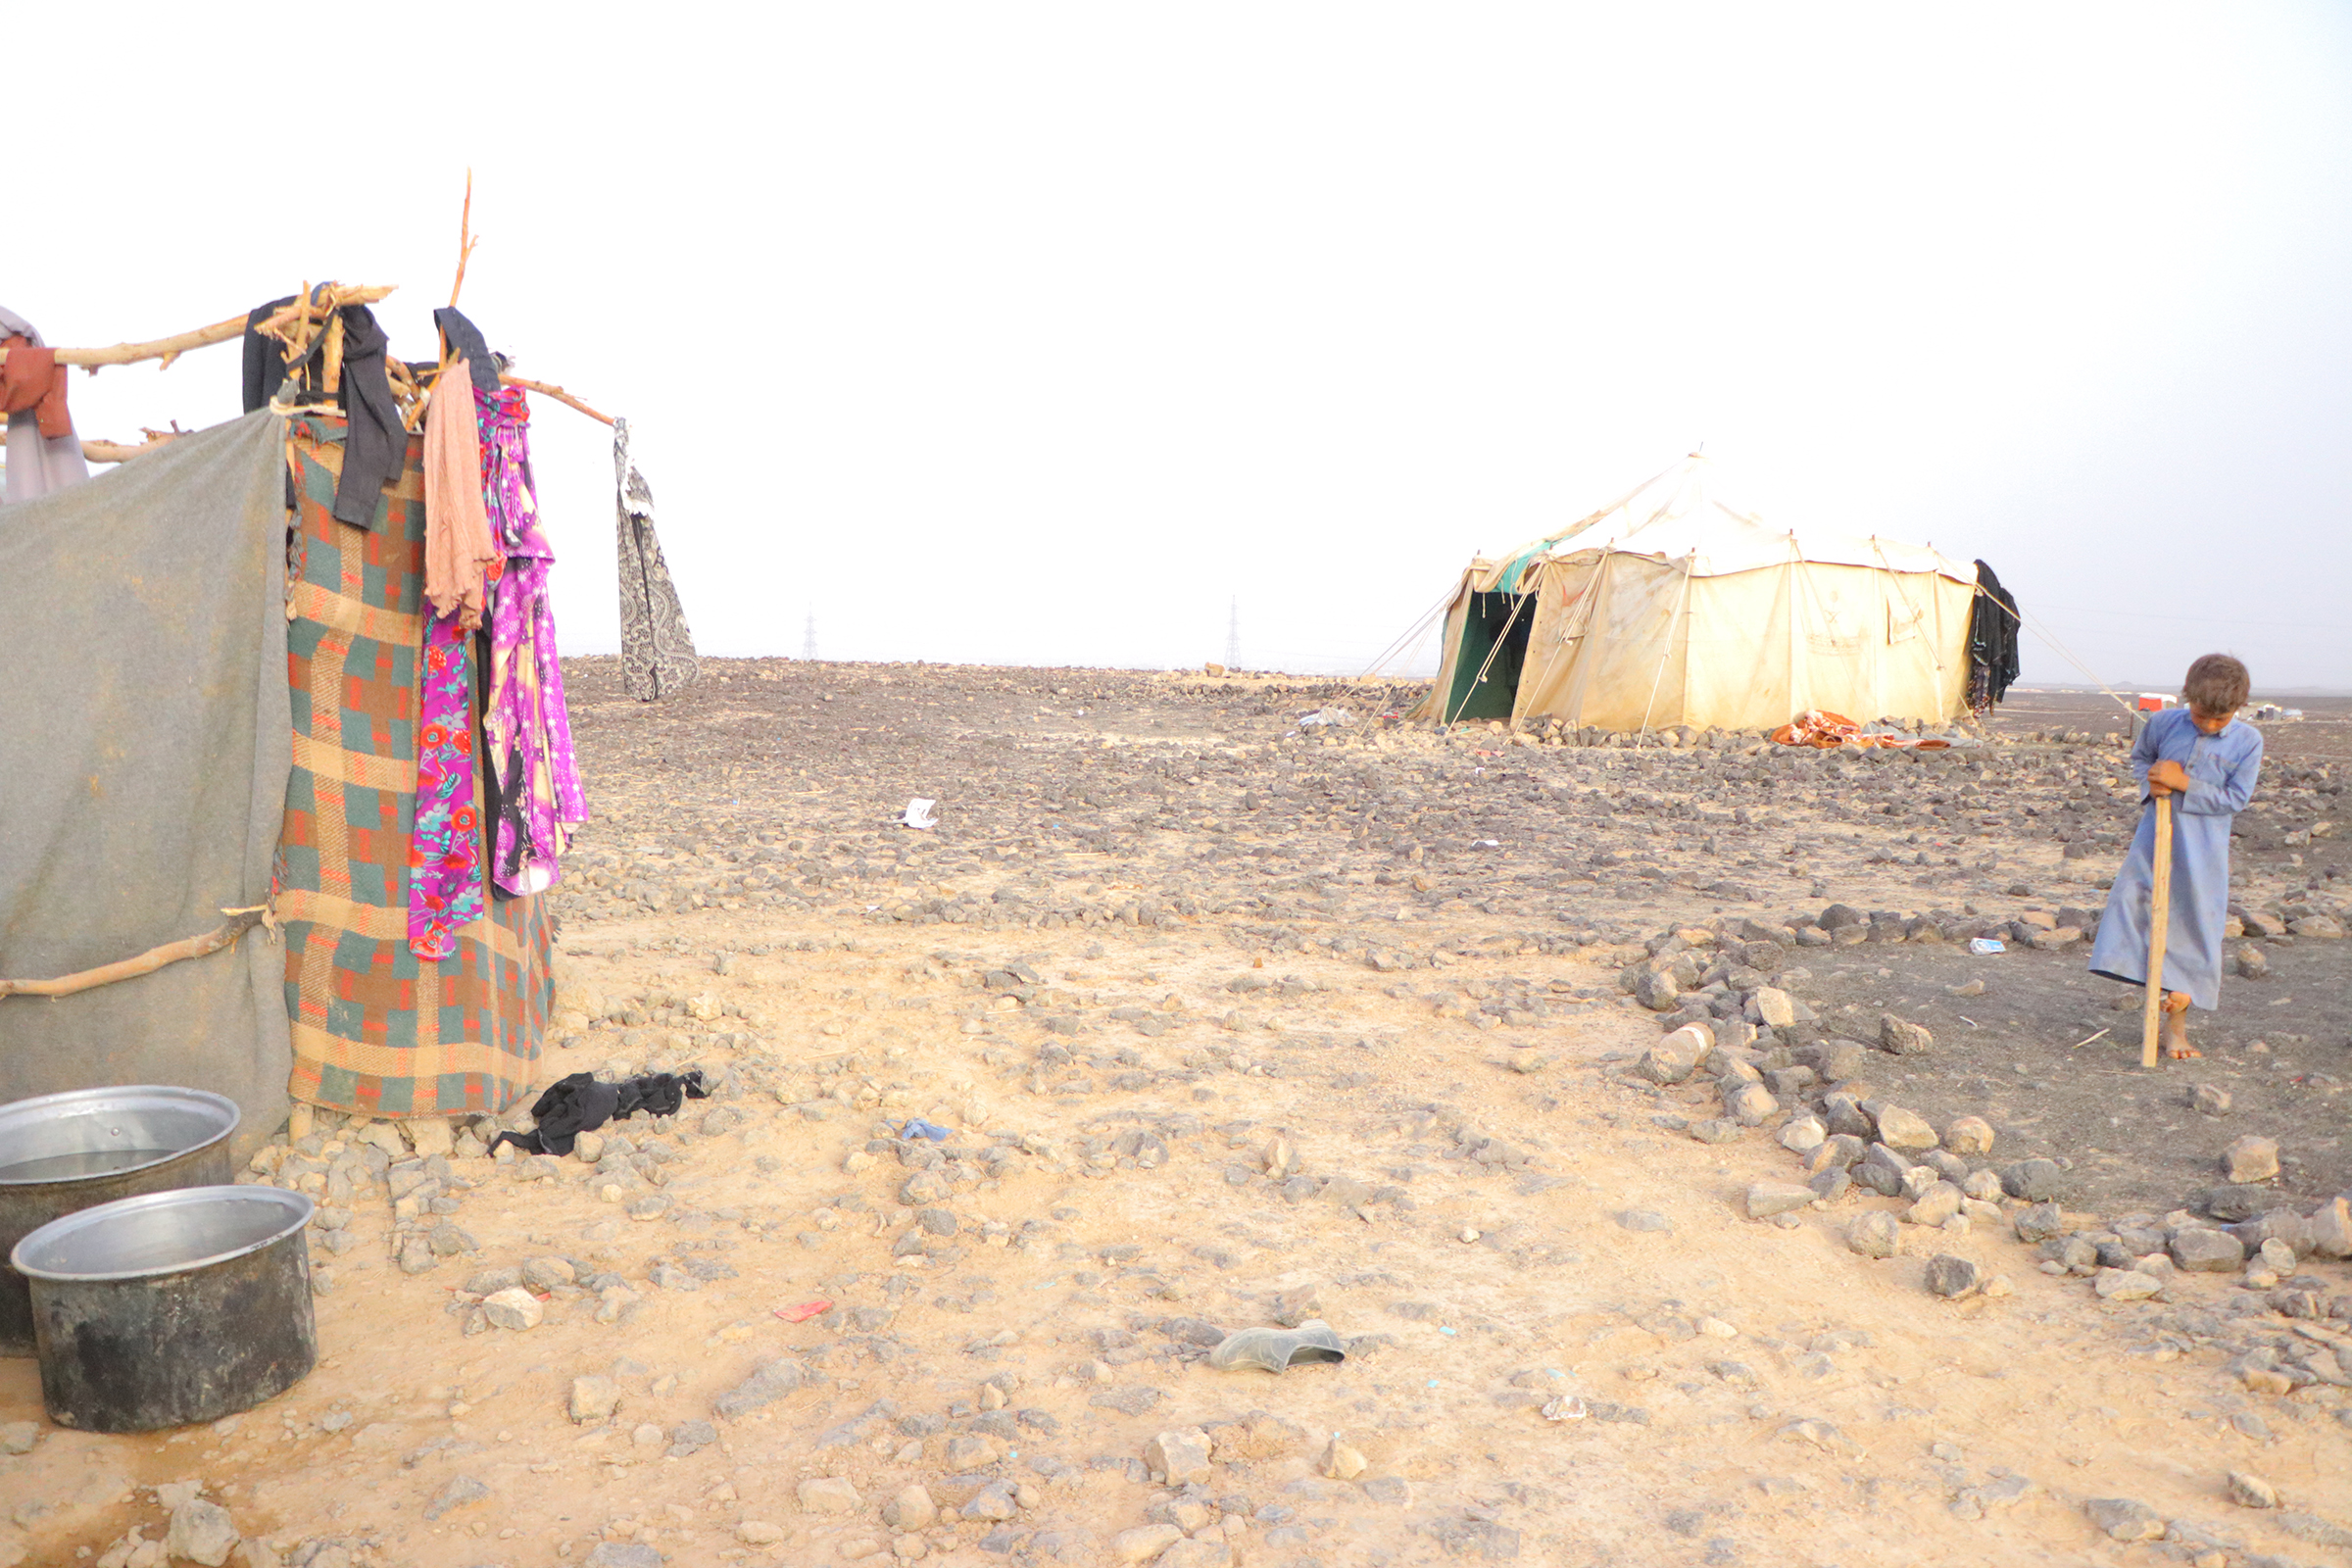 Al-Swaidah displacement camp in Yemen, though there is nothing to mark it as such: no running water, no toilets, no electricity. It is home for around 500 displaced families from Marib and Nihm. (Hassan Al-Homaidi—NRC)